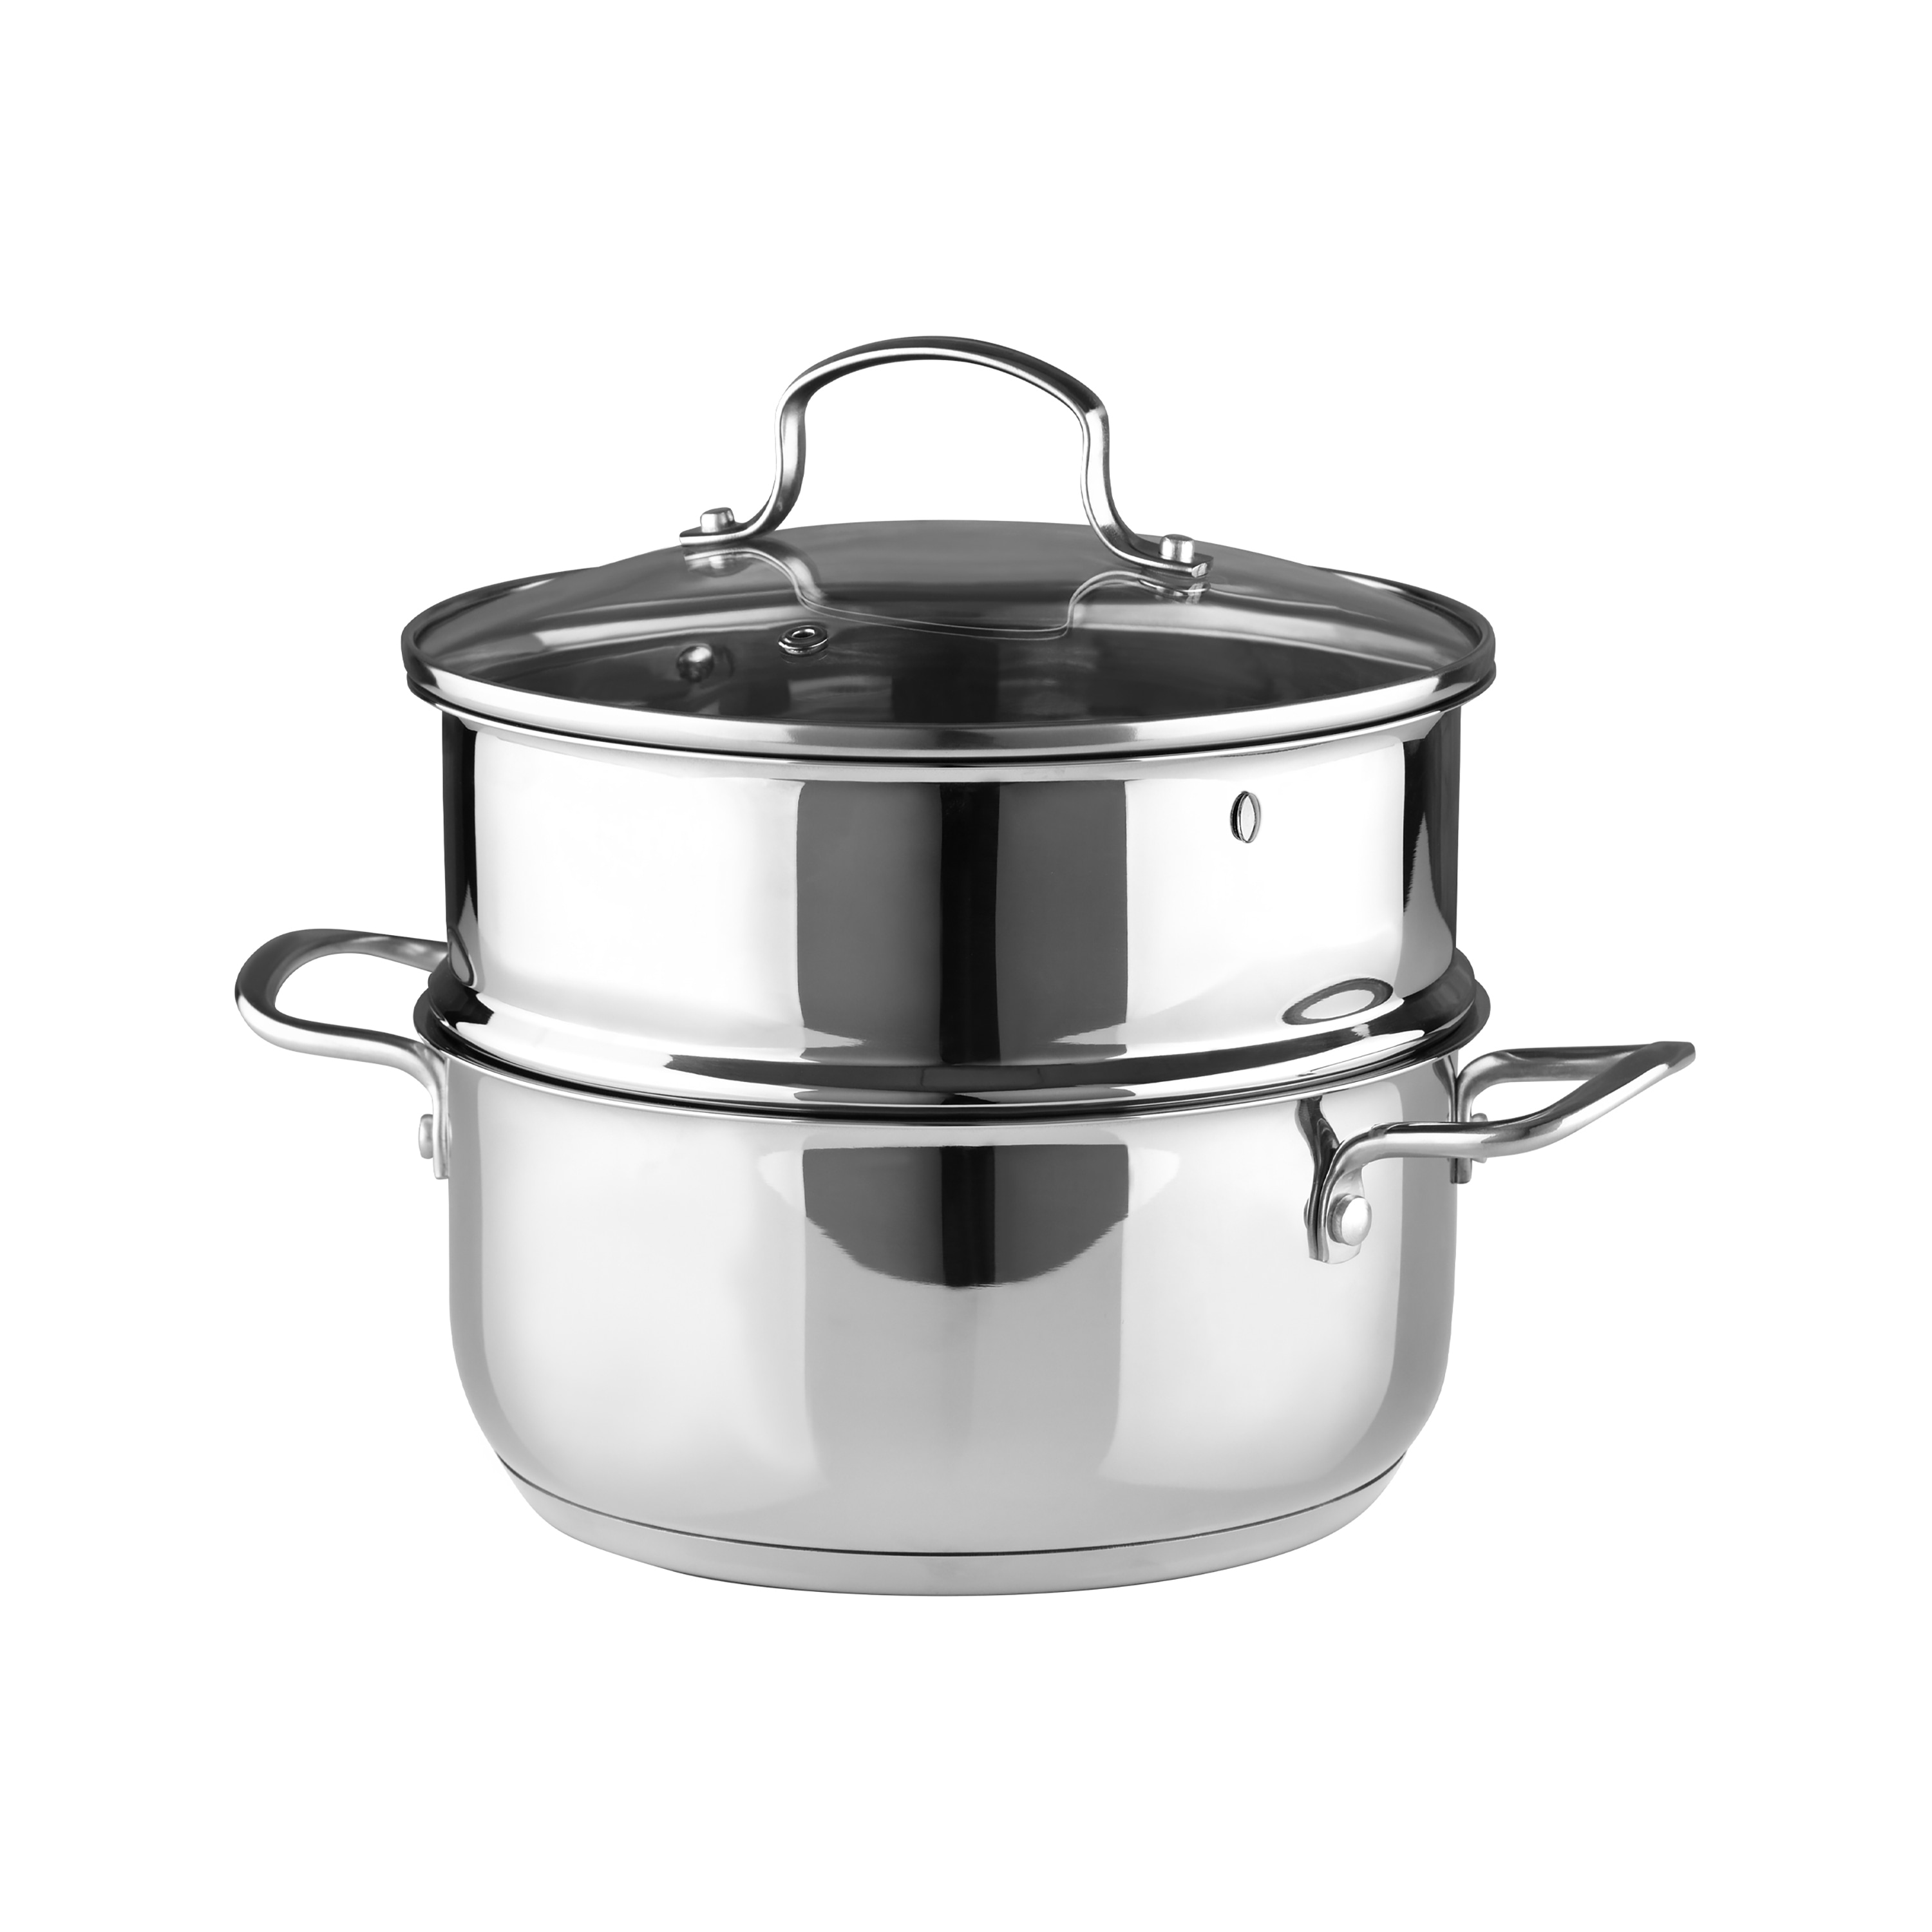 https://ak1.ostkcdn.com/images/products/is/images/direct/042af4b30ef3f23fb95ea8dacbf88b6ee9ce6001/Bergner-Essentials-BGUS10127STS-2.6-Quart-Stainless-Steel-Soup-Pot-with-Tempered-Glass-Lid-and-Steamer-Insert.jpg